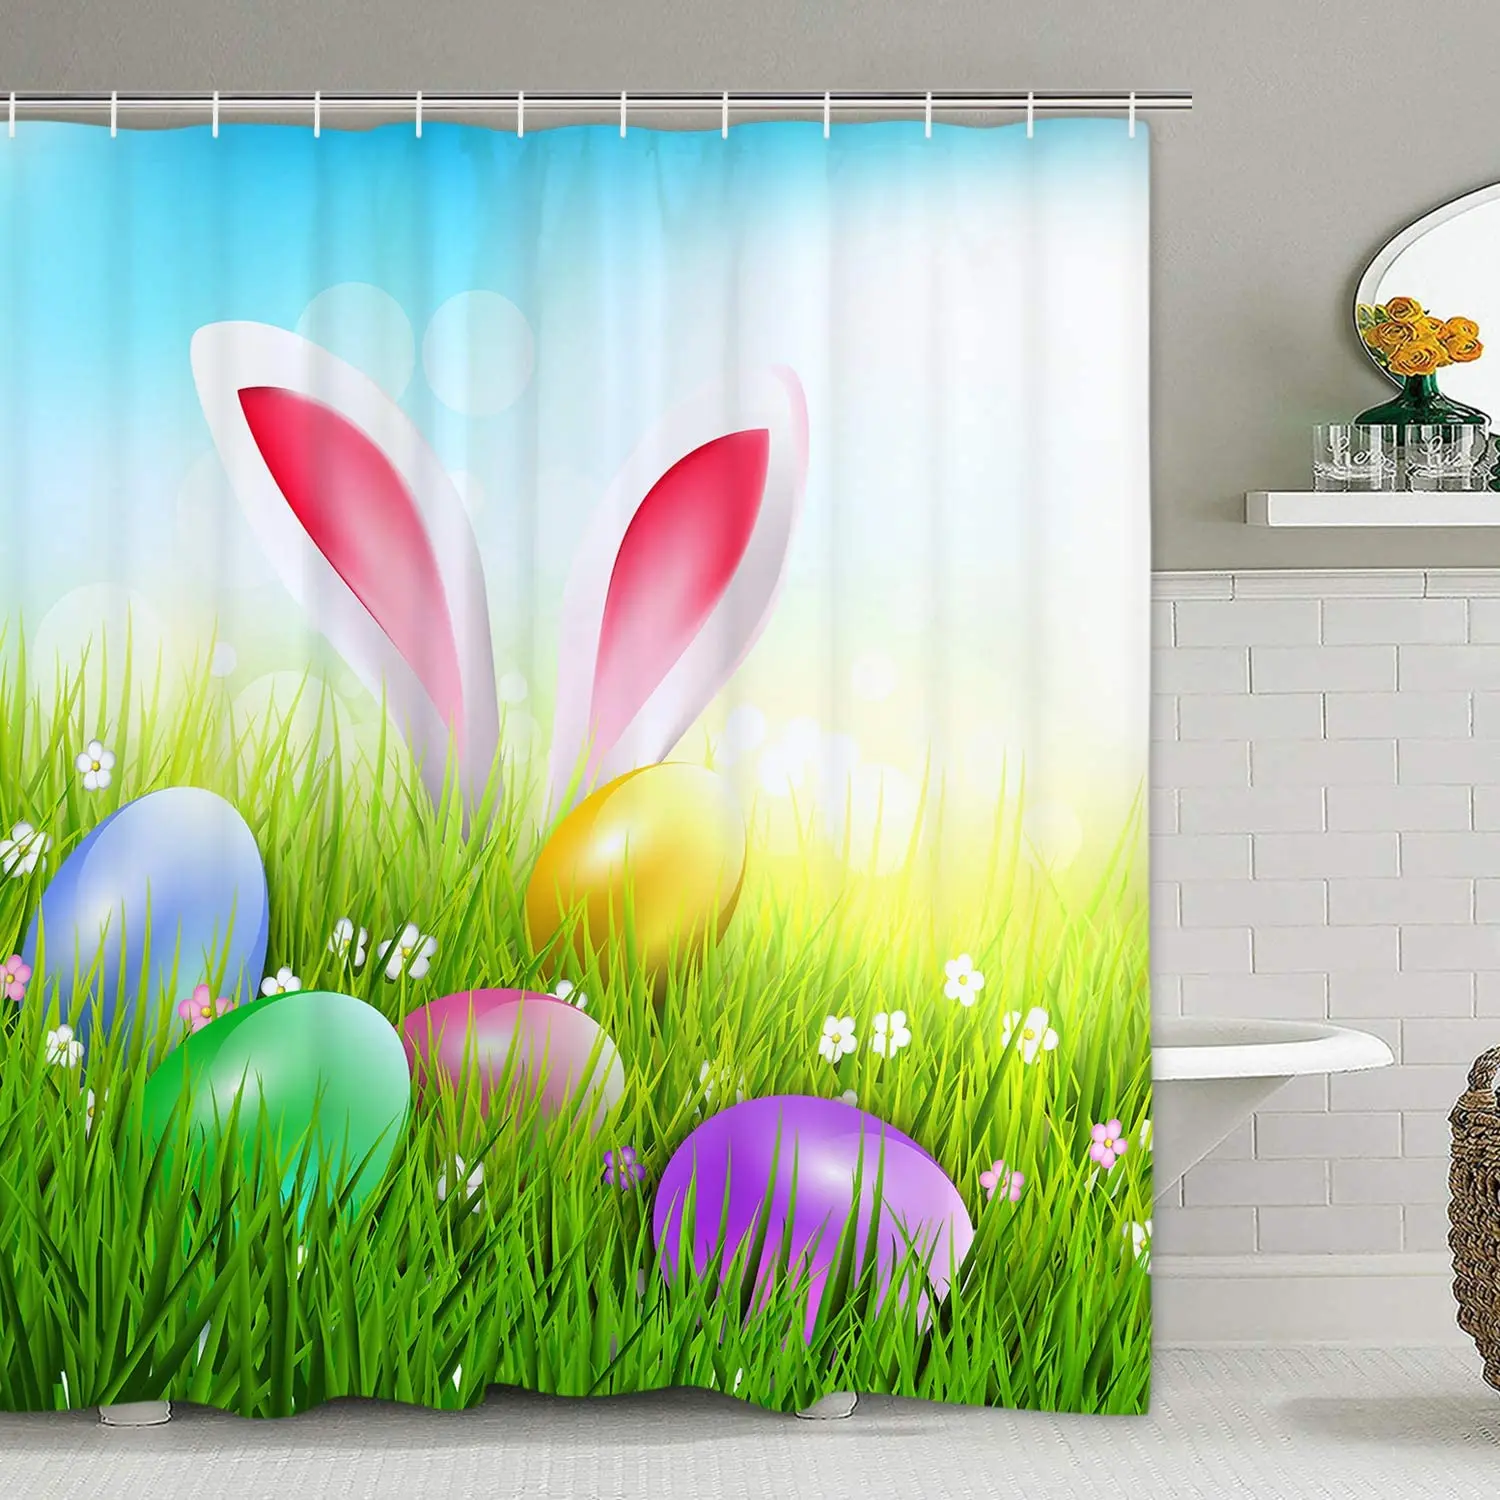 Happy Easter Egg & rabbit Waterproof Polyester Fabric Bathroom Shower Curtain 